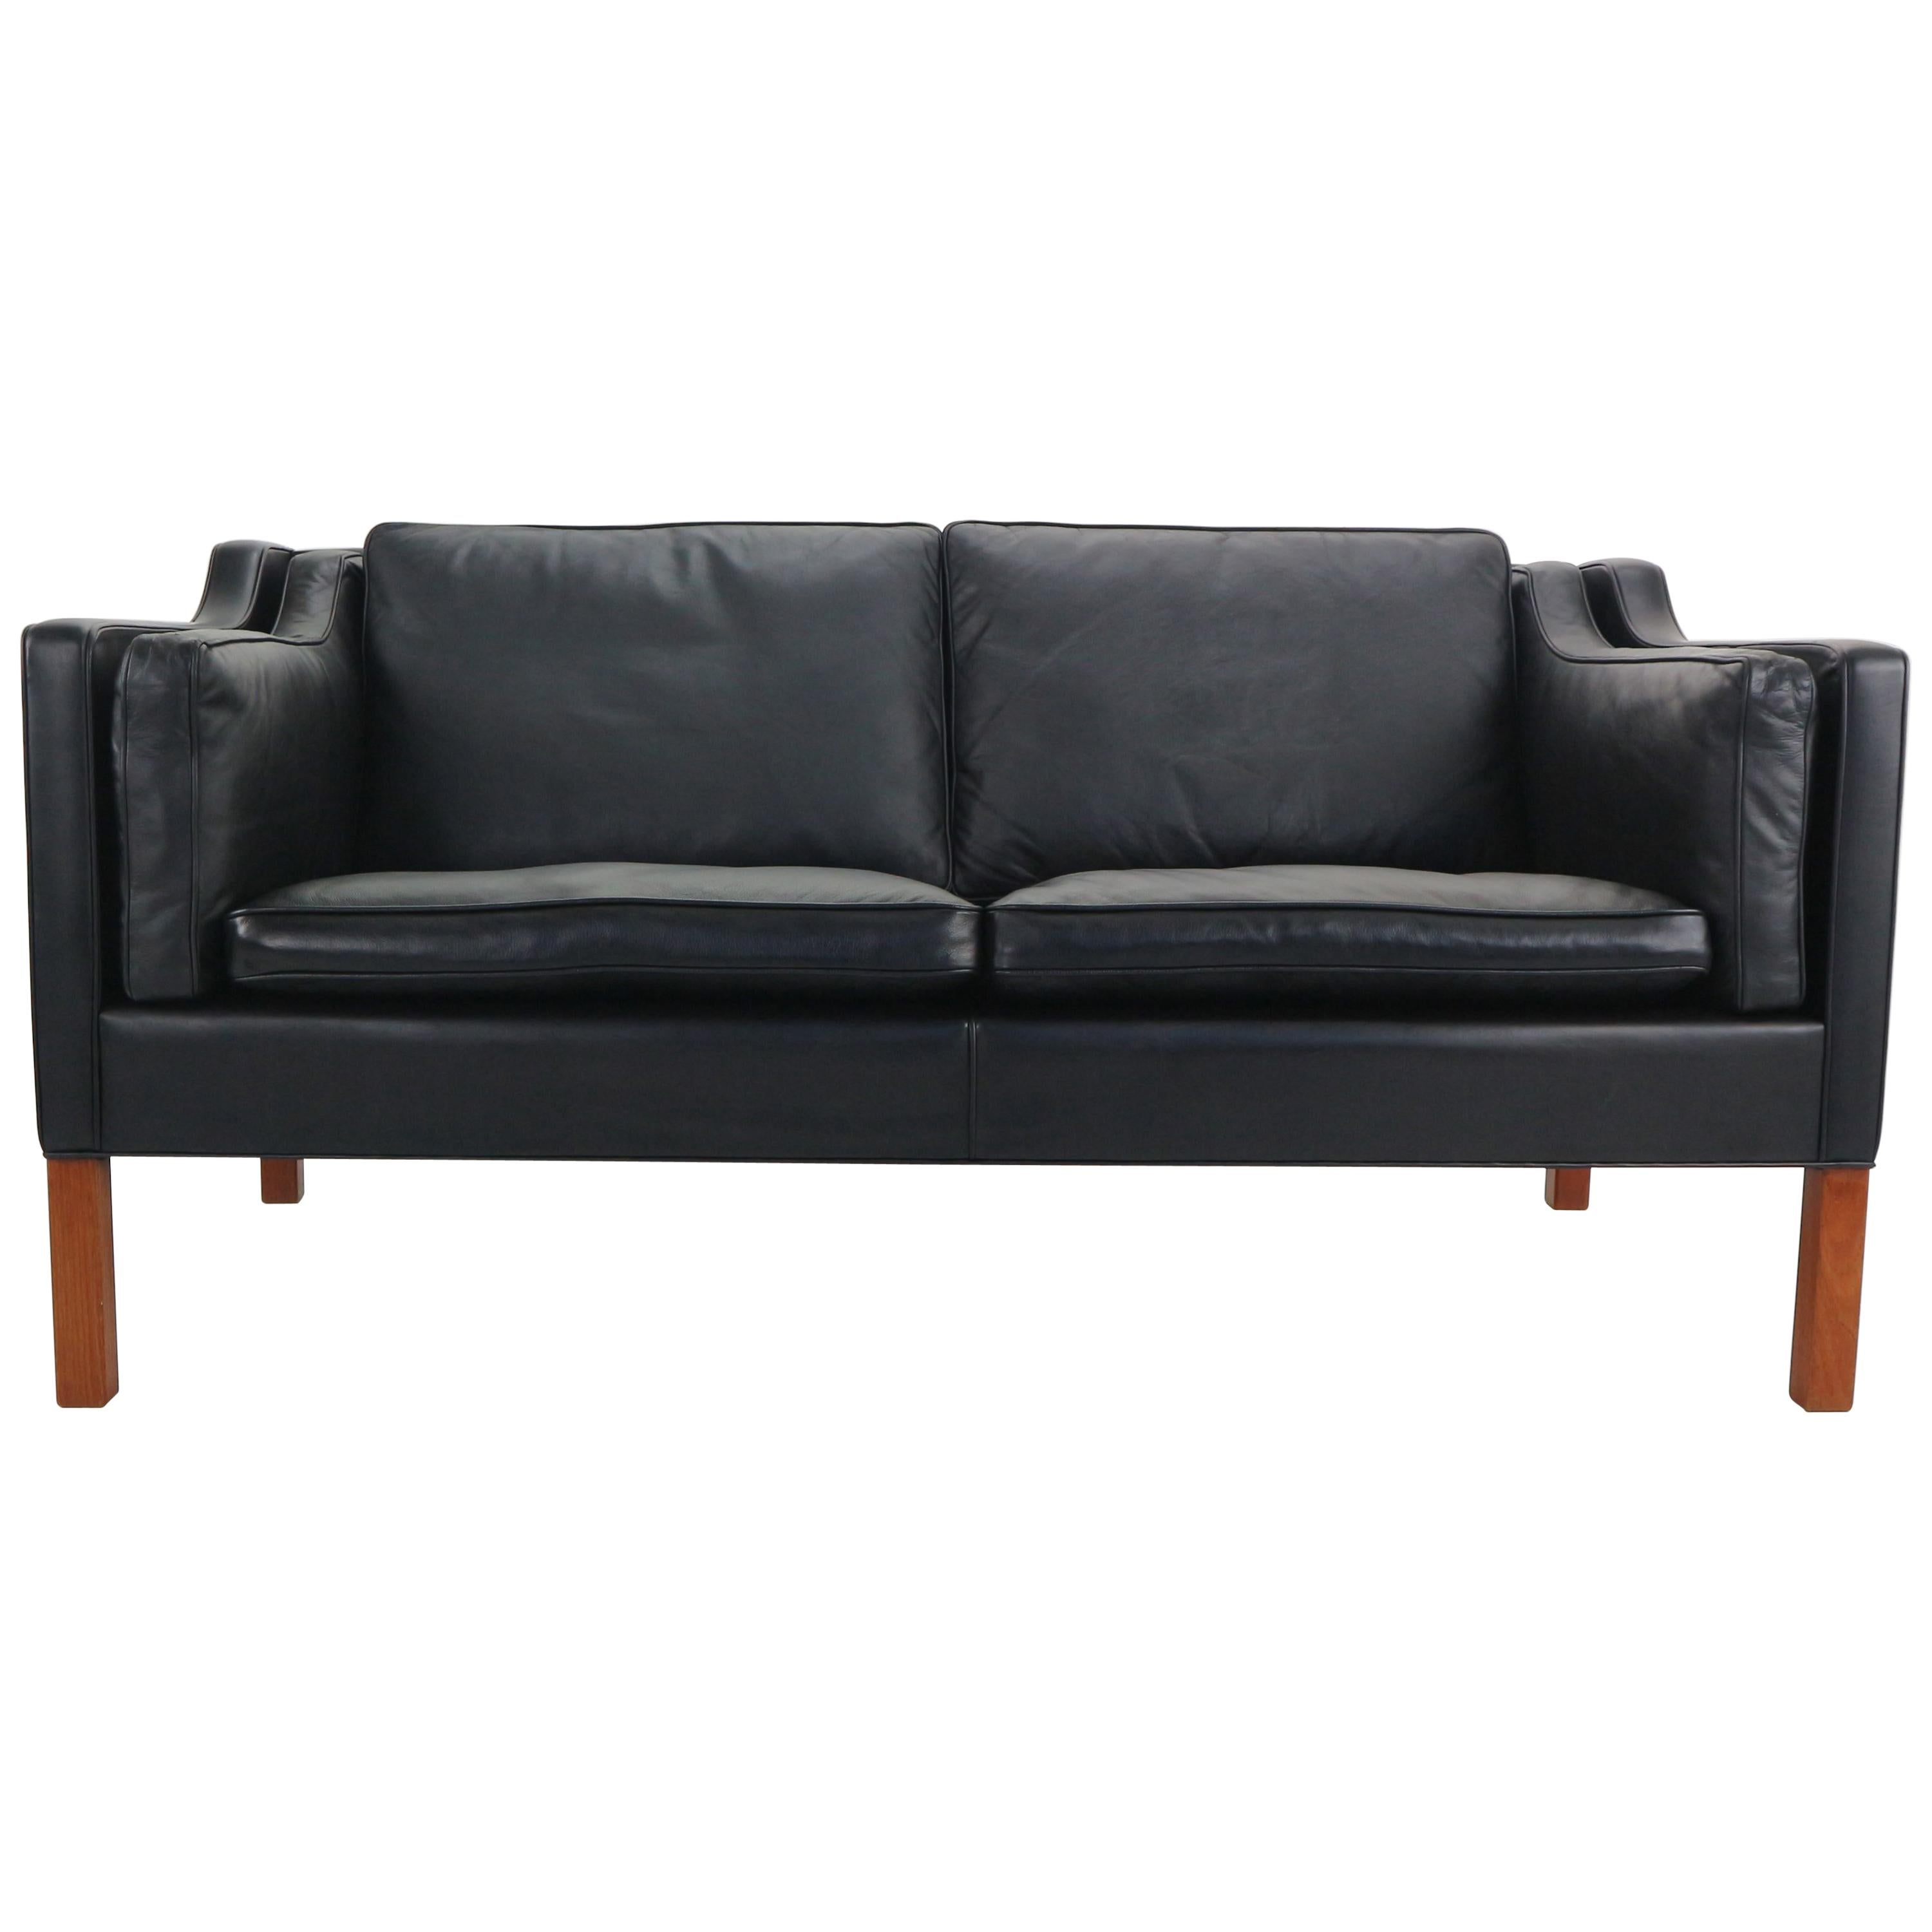 Two-Seat Black Leather Sofa Designed by Børge Mogensen for Fredericia A/S, 1960